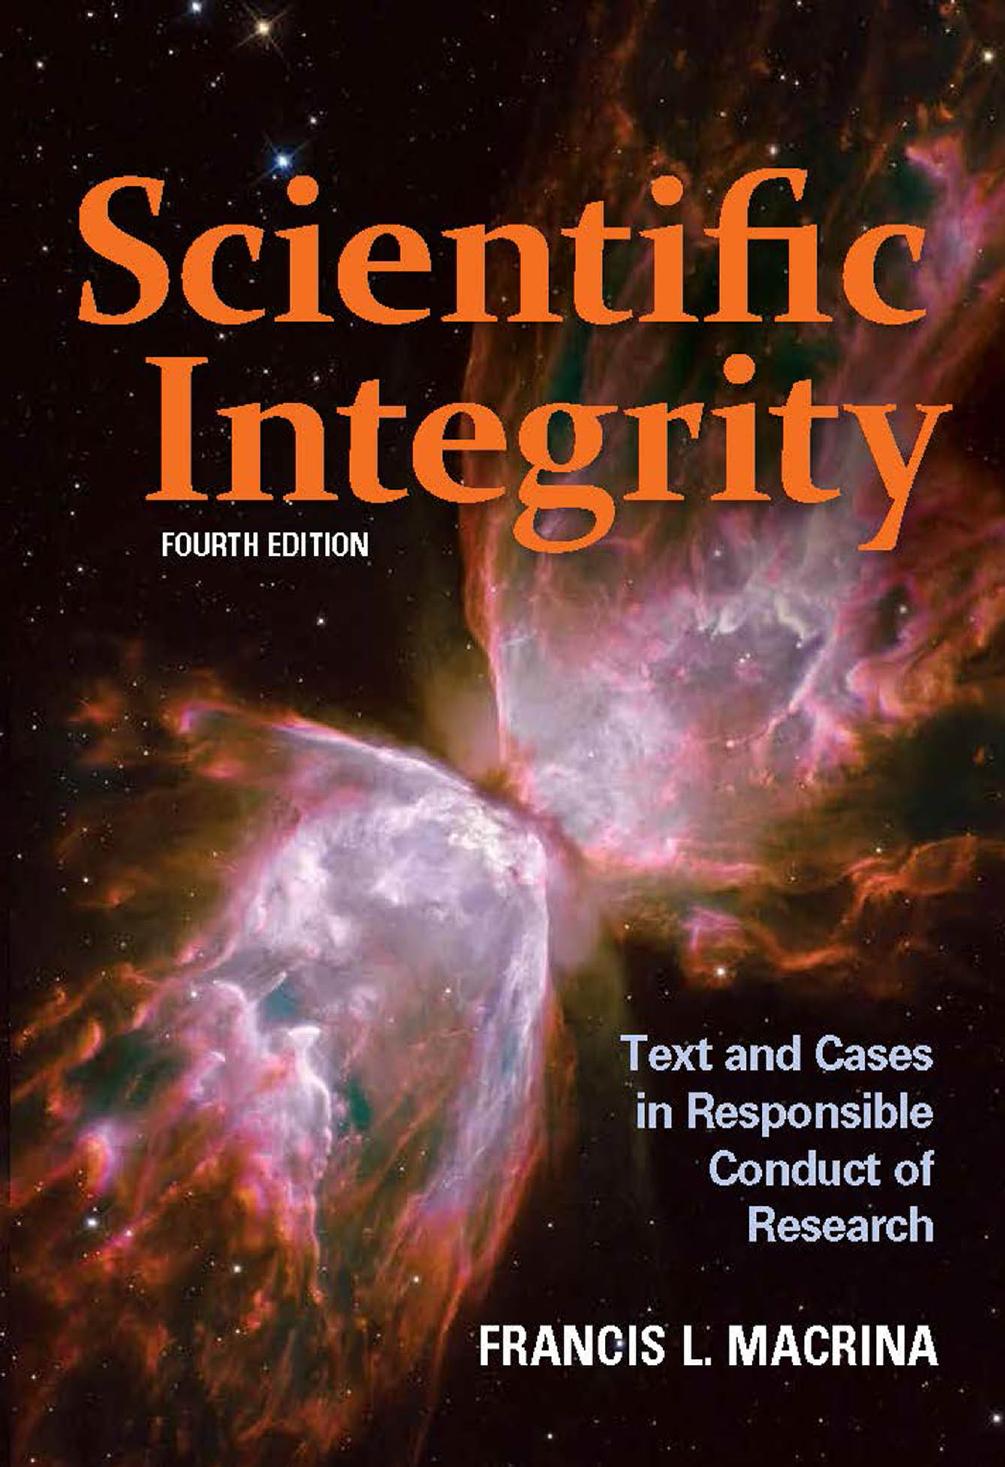 Scientific Integrity: Text and Cases in Responsible Conduct of Research (4th Edition)